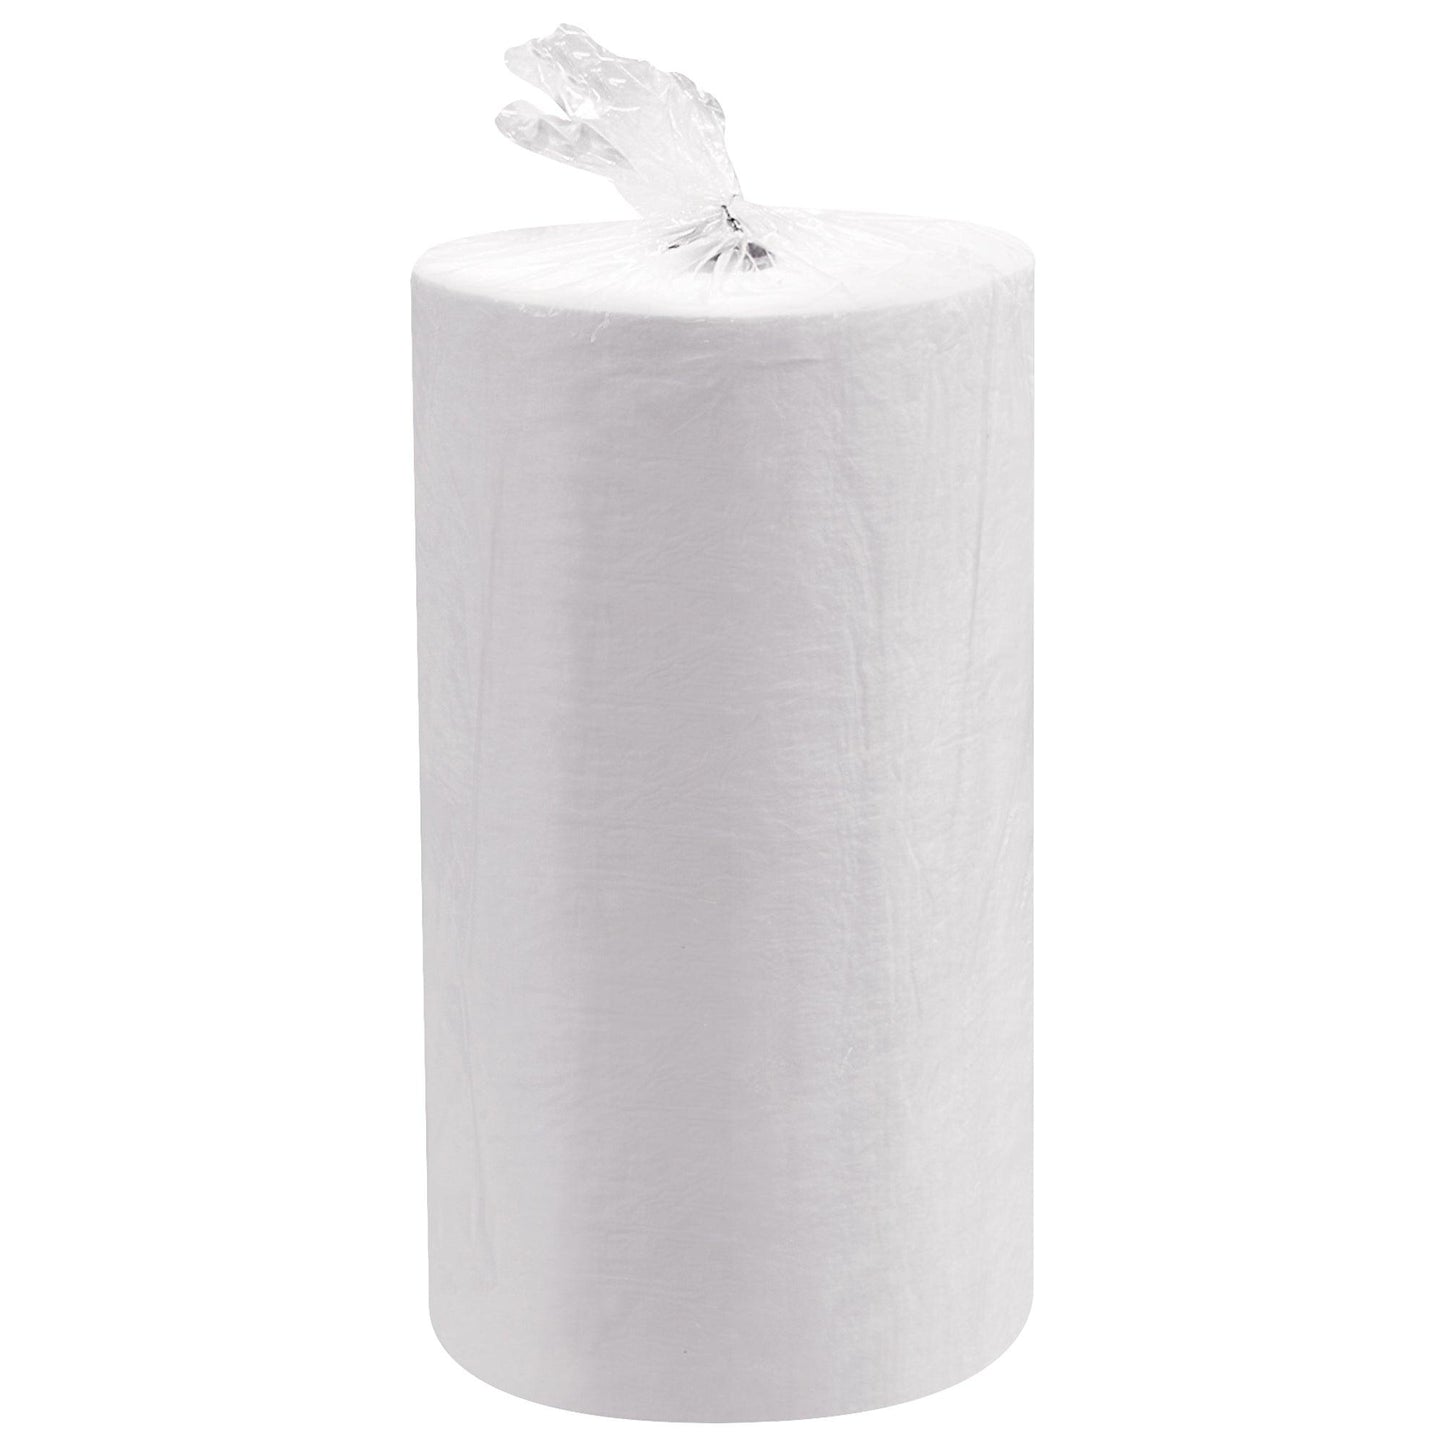 Oil Only Sorbent Roll - 32" x 150', Heavy - SORB480